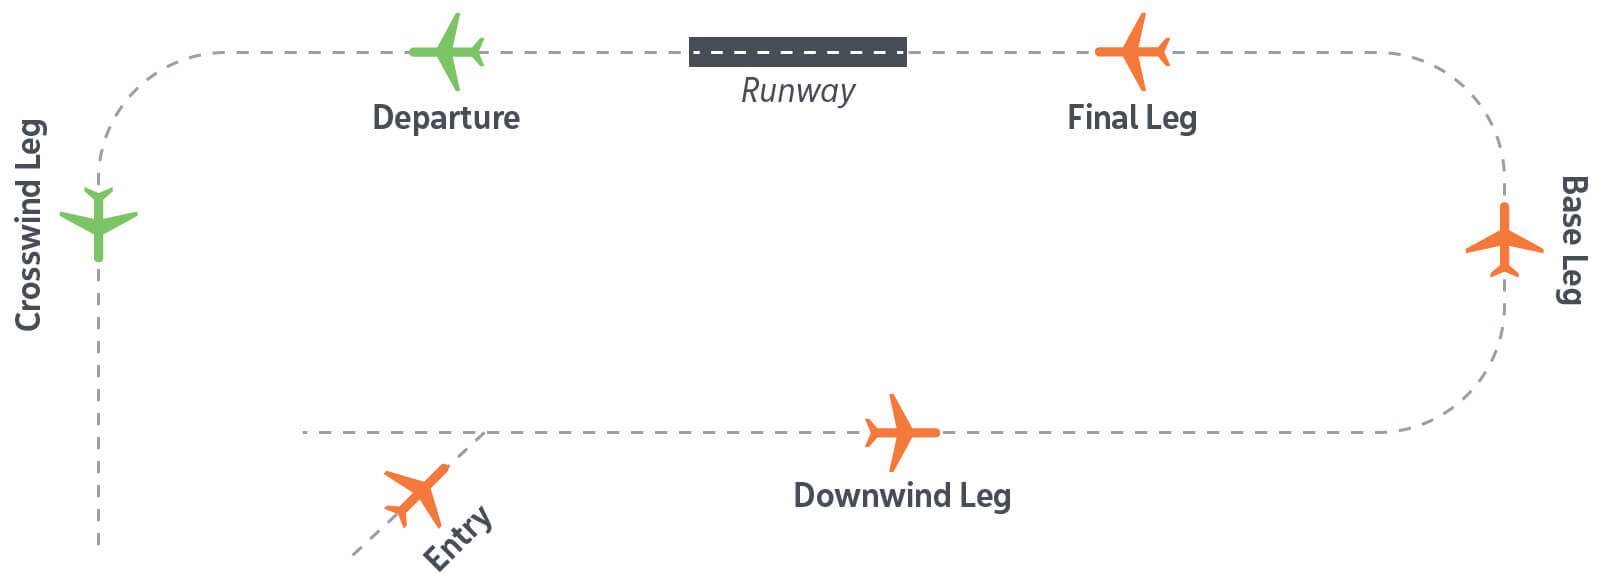 Diagram explaining a standard landing pattern for a runway. Arriving aircraft follow an Entry, Downwind, Base and Final leg towards the runway. Departing aircraft follow a Departure leg in the direction of the runway, followed by a 90-degree turn to a Crosswind Leg.